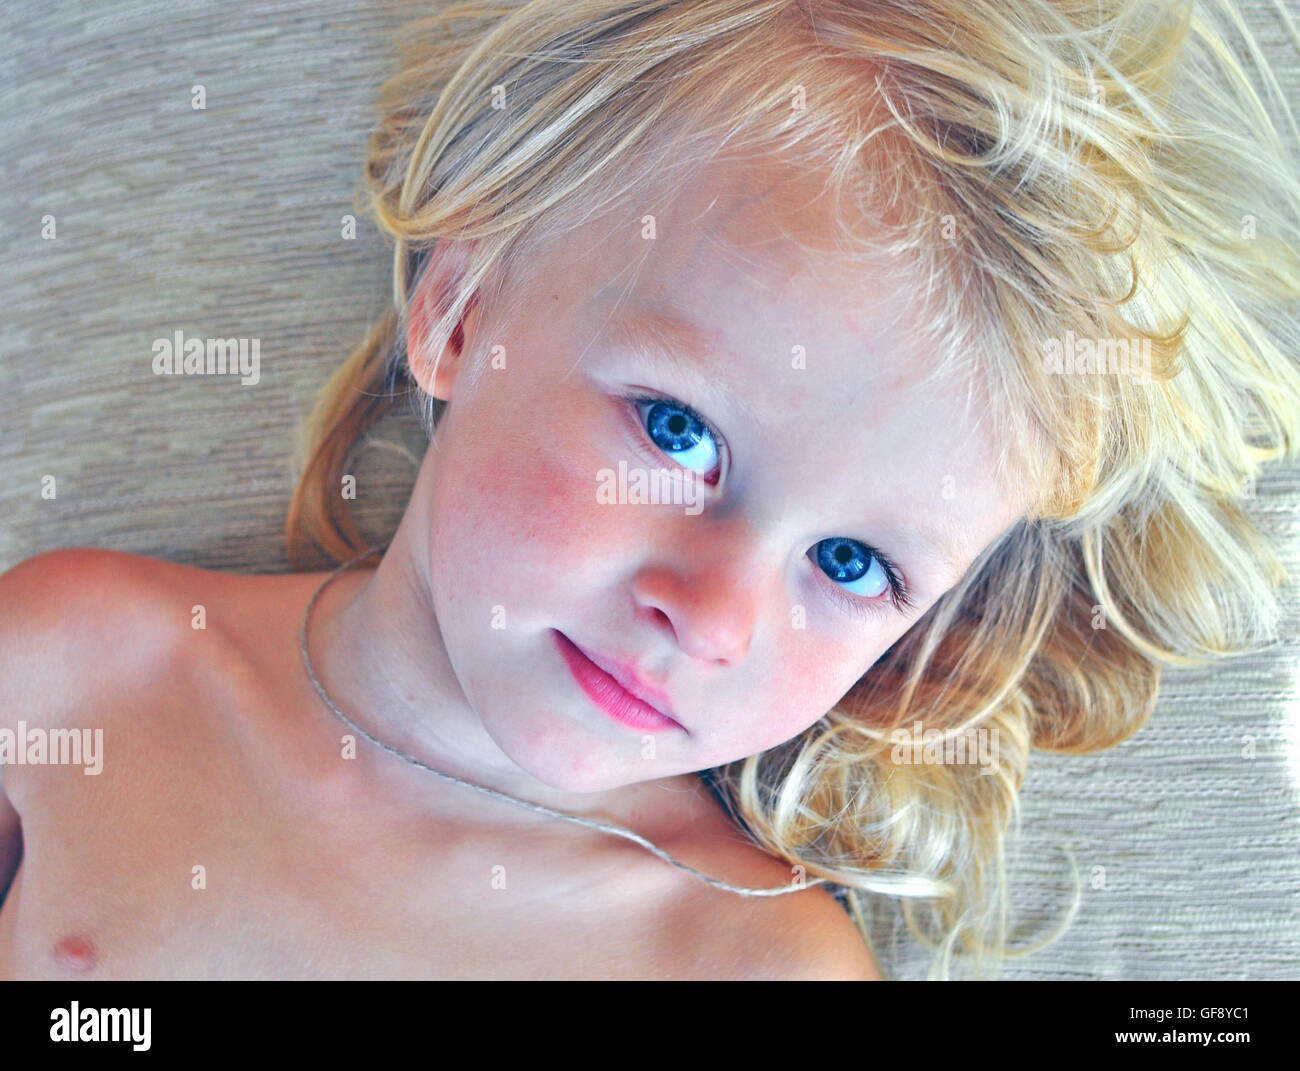 Cute baby with long blonde hair Stock Photo